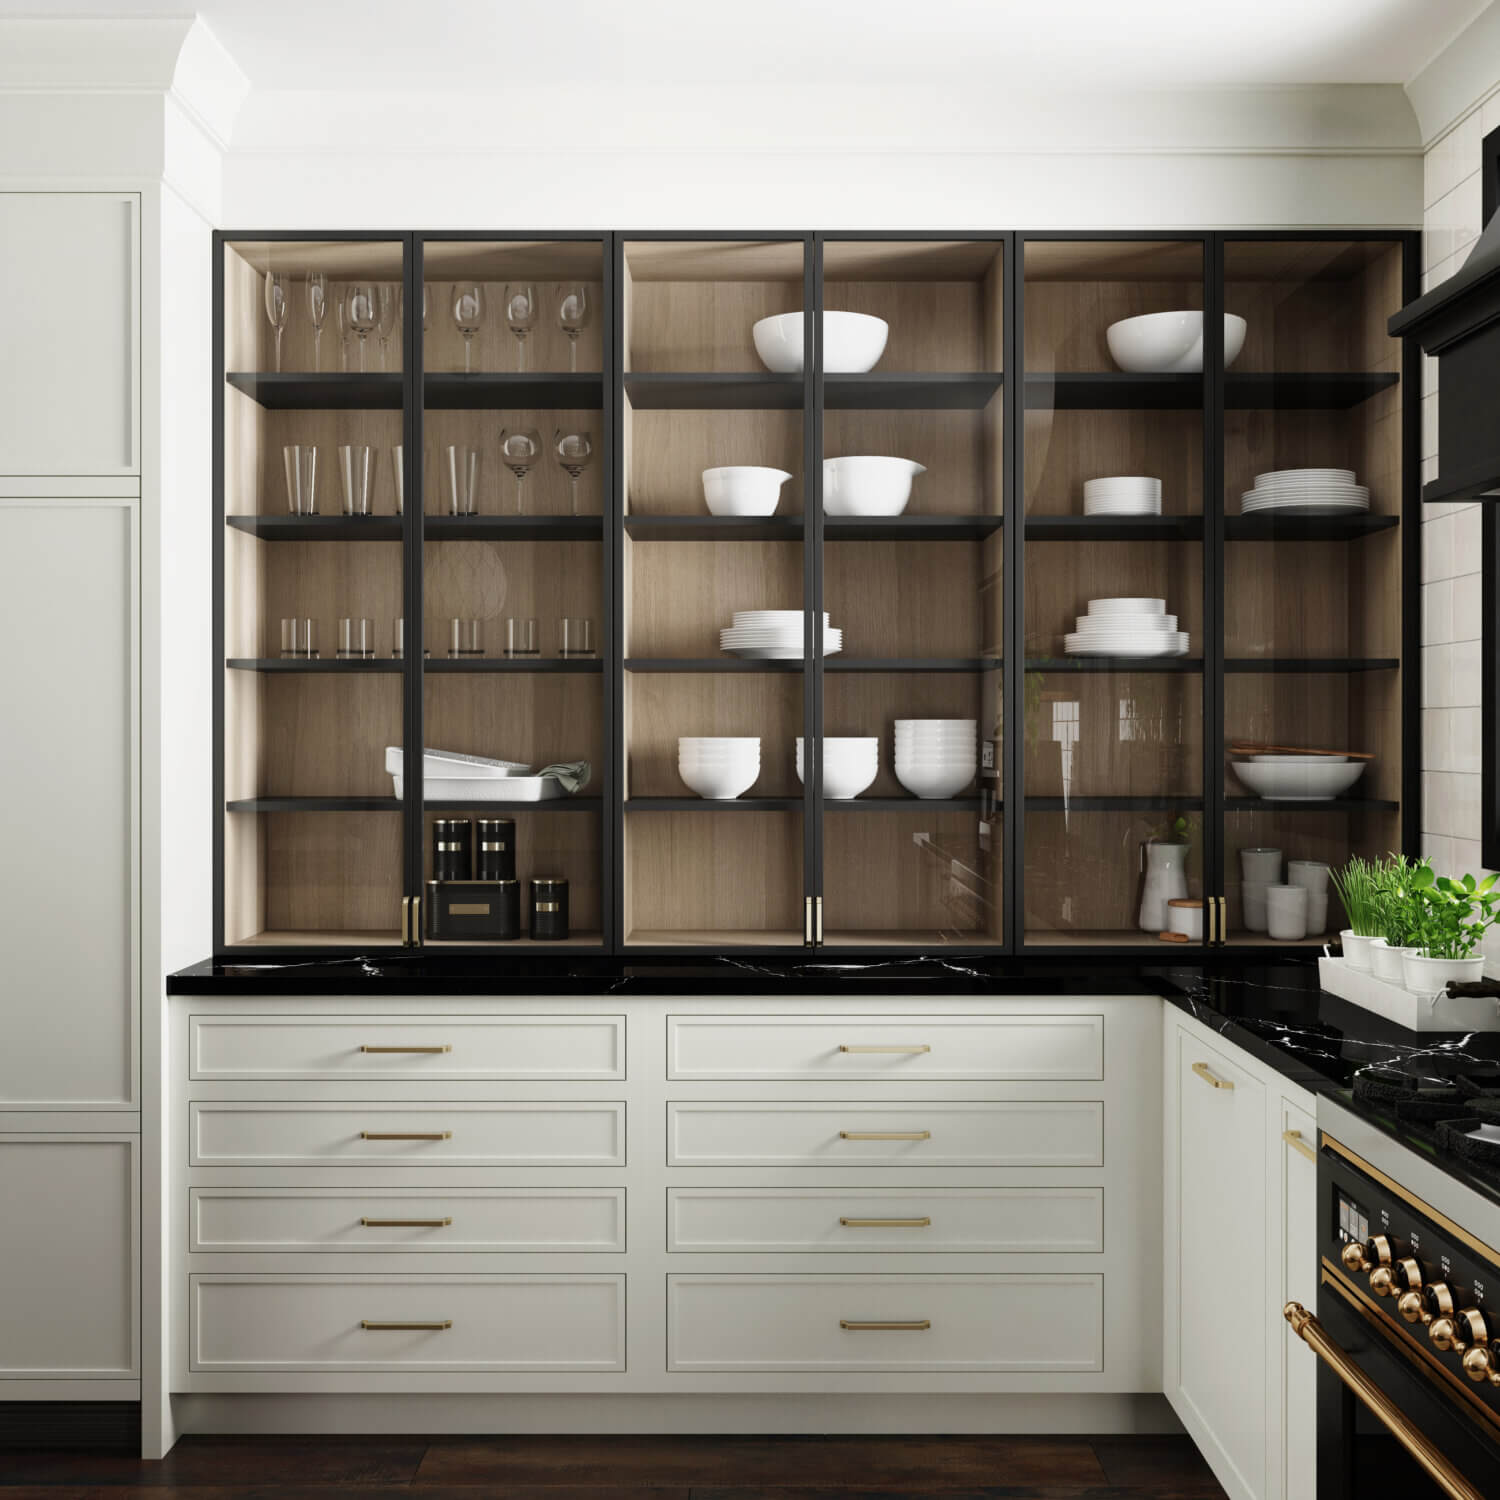 Glass cabinet doors with black metal door frames on white painted cabinets with a white oak cabinet interior and brass hardware. This black and white kitchen uses a beautiful shaker door style with thin rails and stiles with inset cabinets from Dura Supreme Cabinetry.